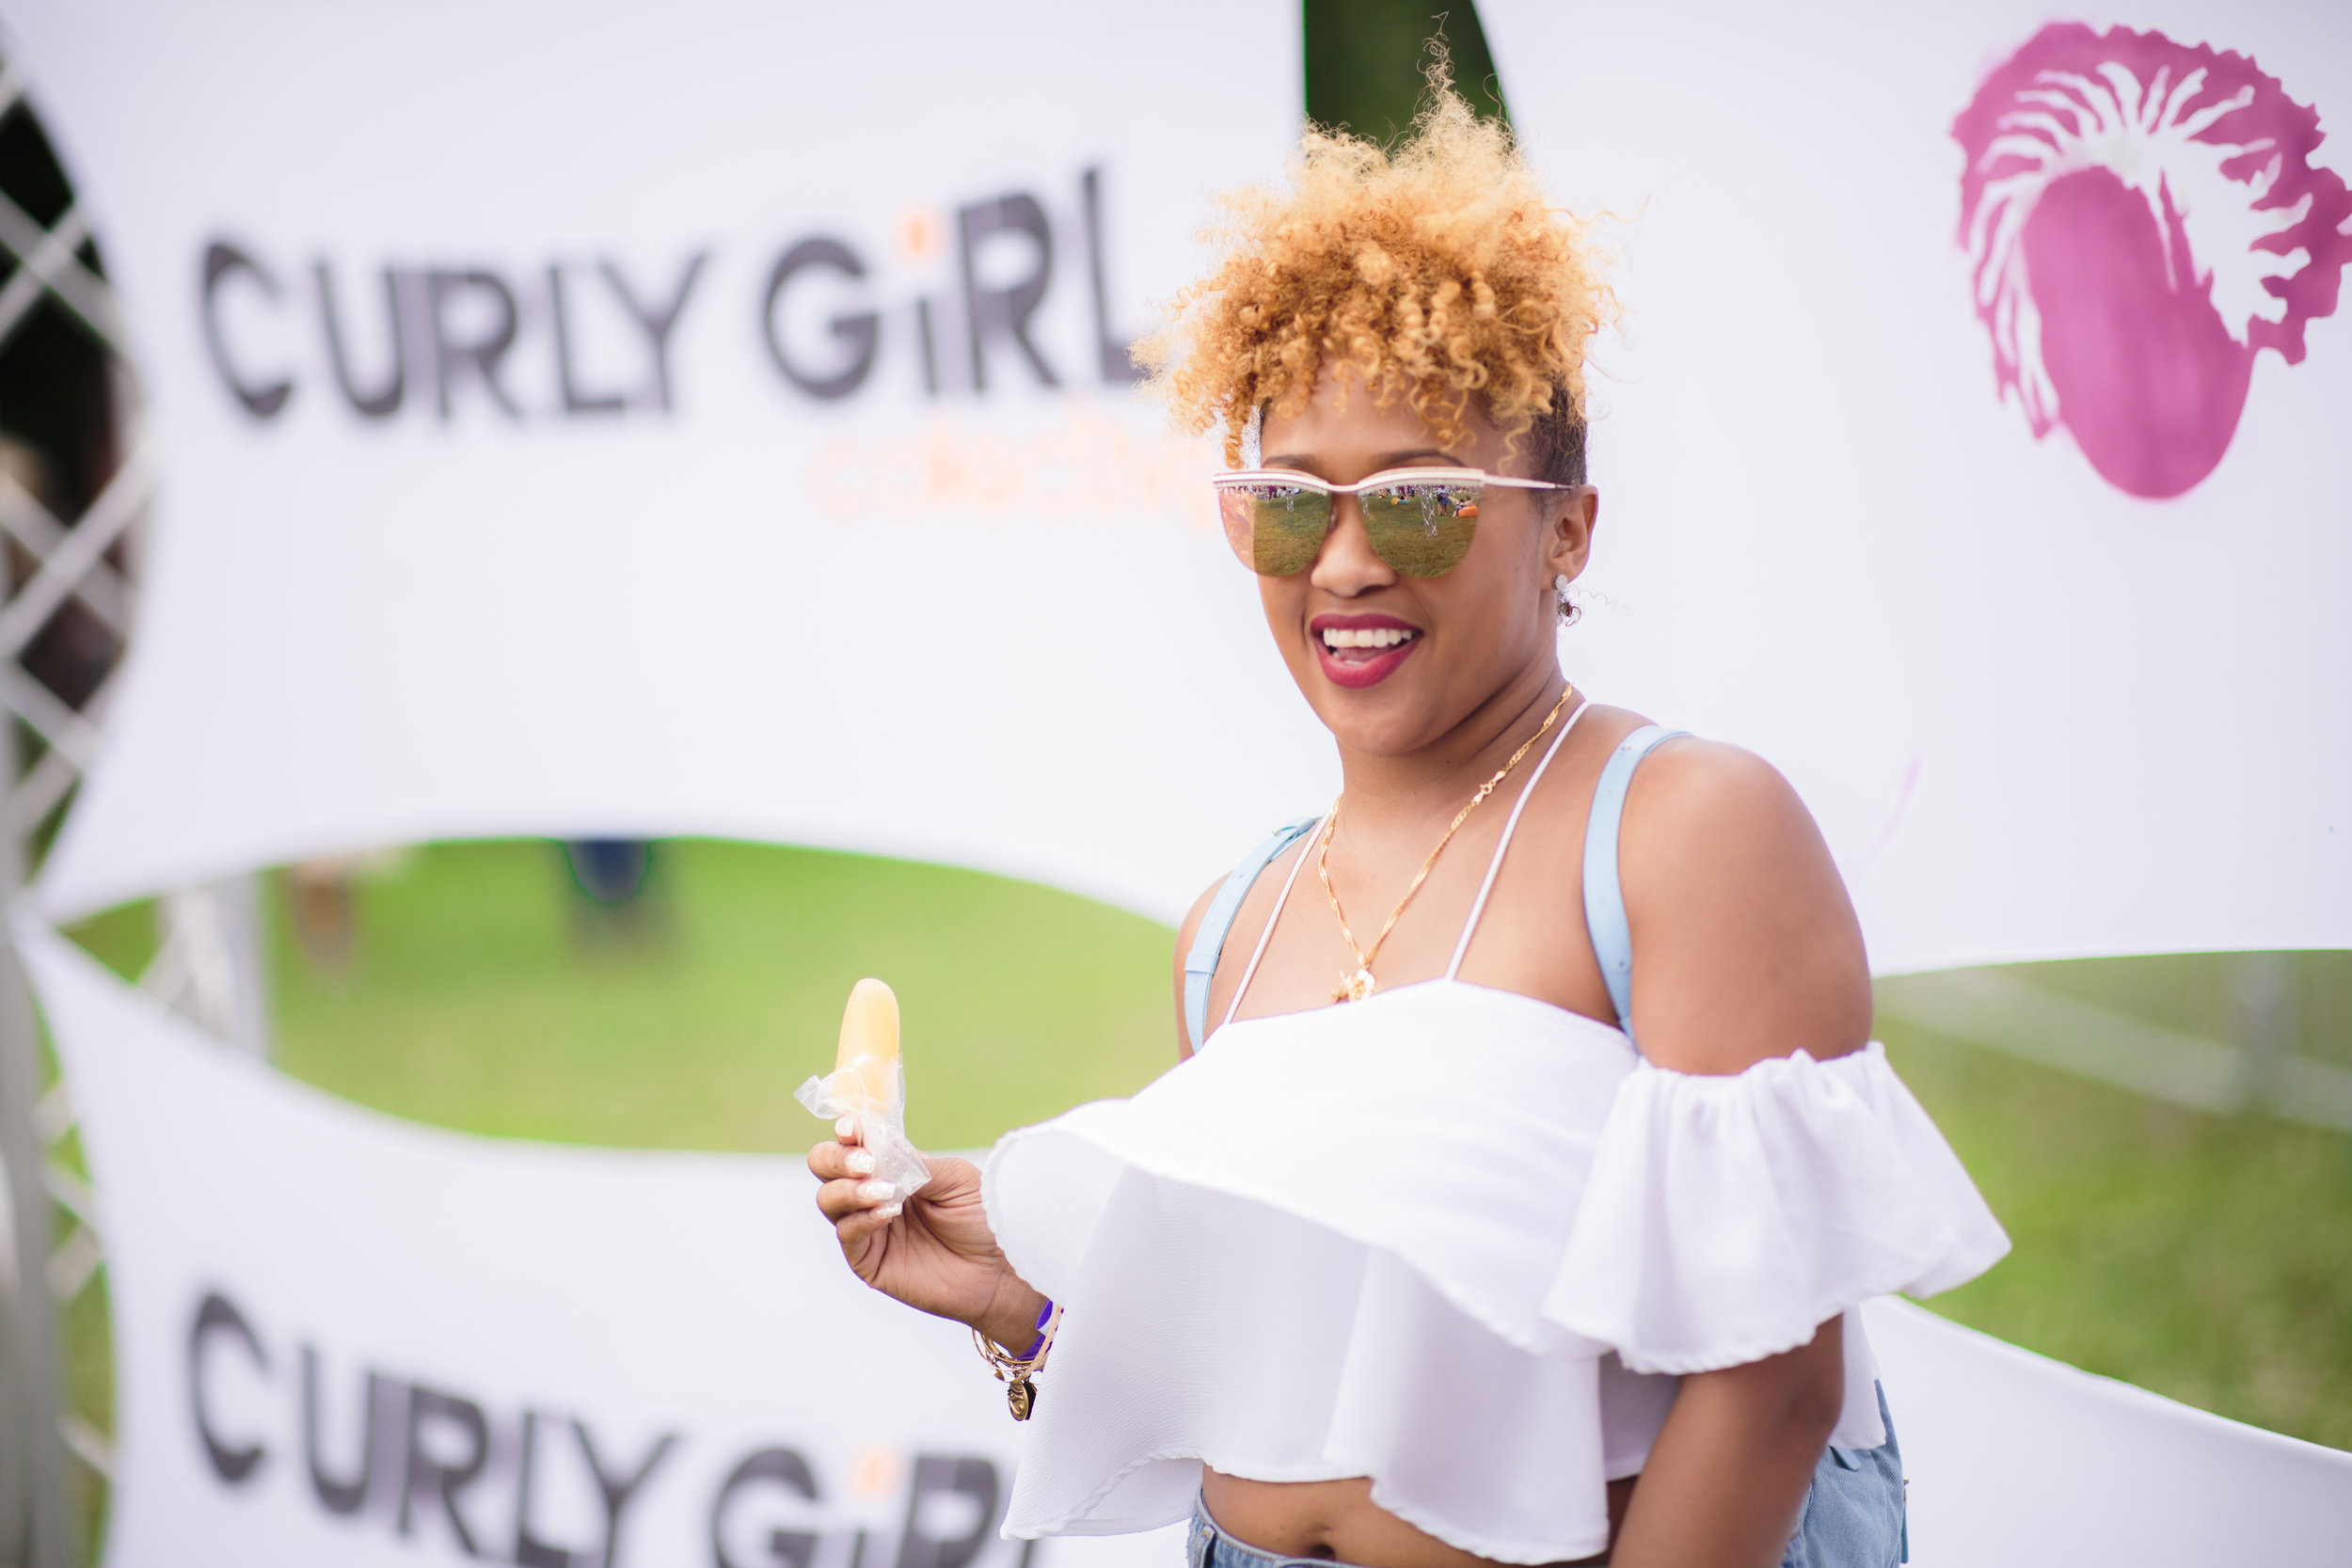  The Curly Girl Collective Presents: CURLFEST 2018 - July 21st, 2018 - Photography Coverage Provided By: KOLIN MENDEZ | © 2018 KOLIN MENDEZ PHOTOGRAPHY - www.kolinmendez.com 